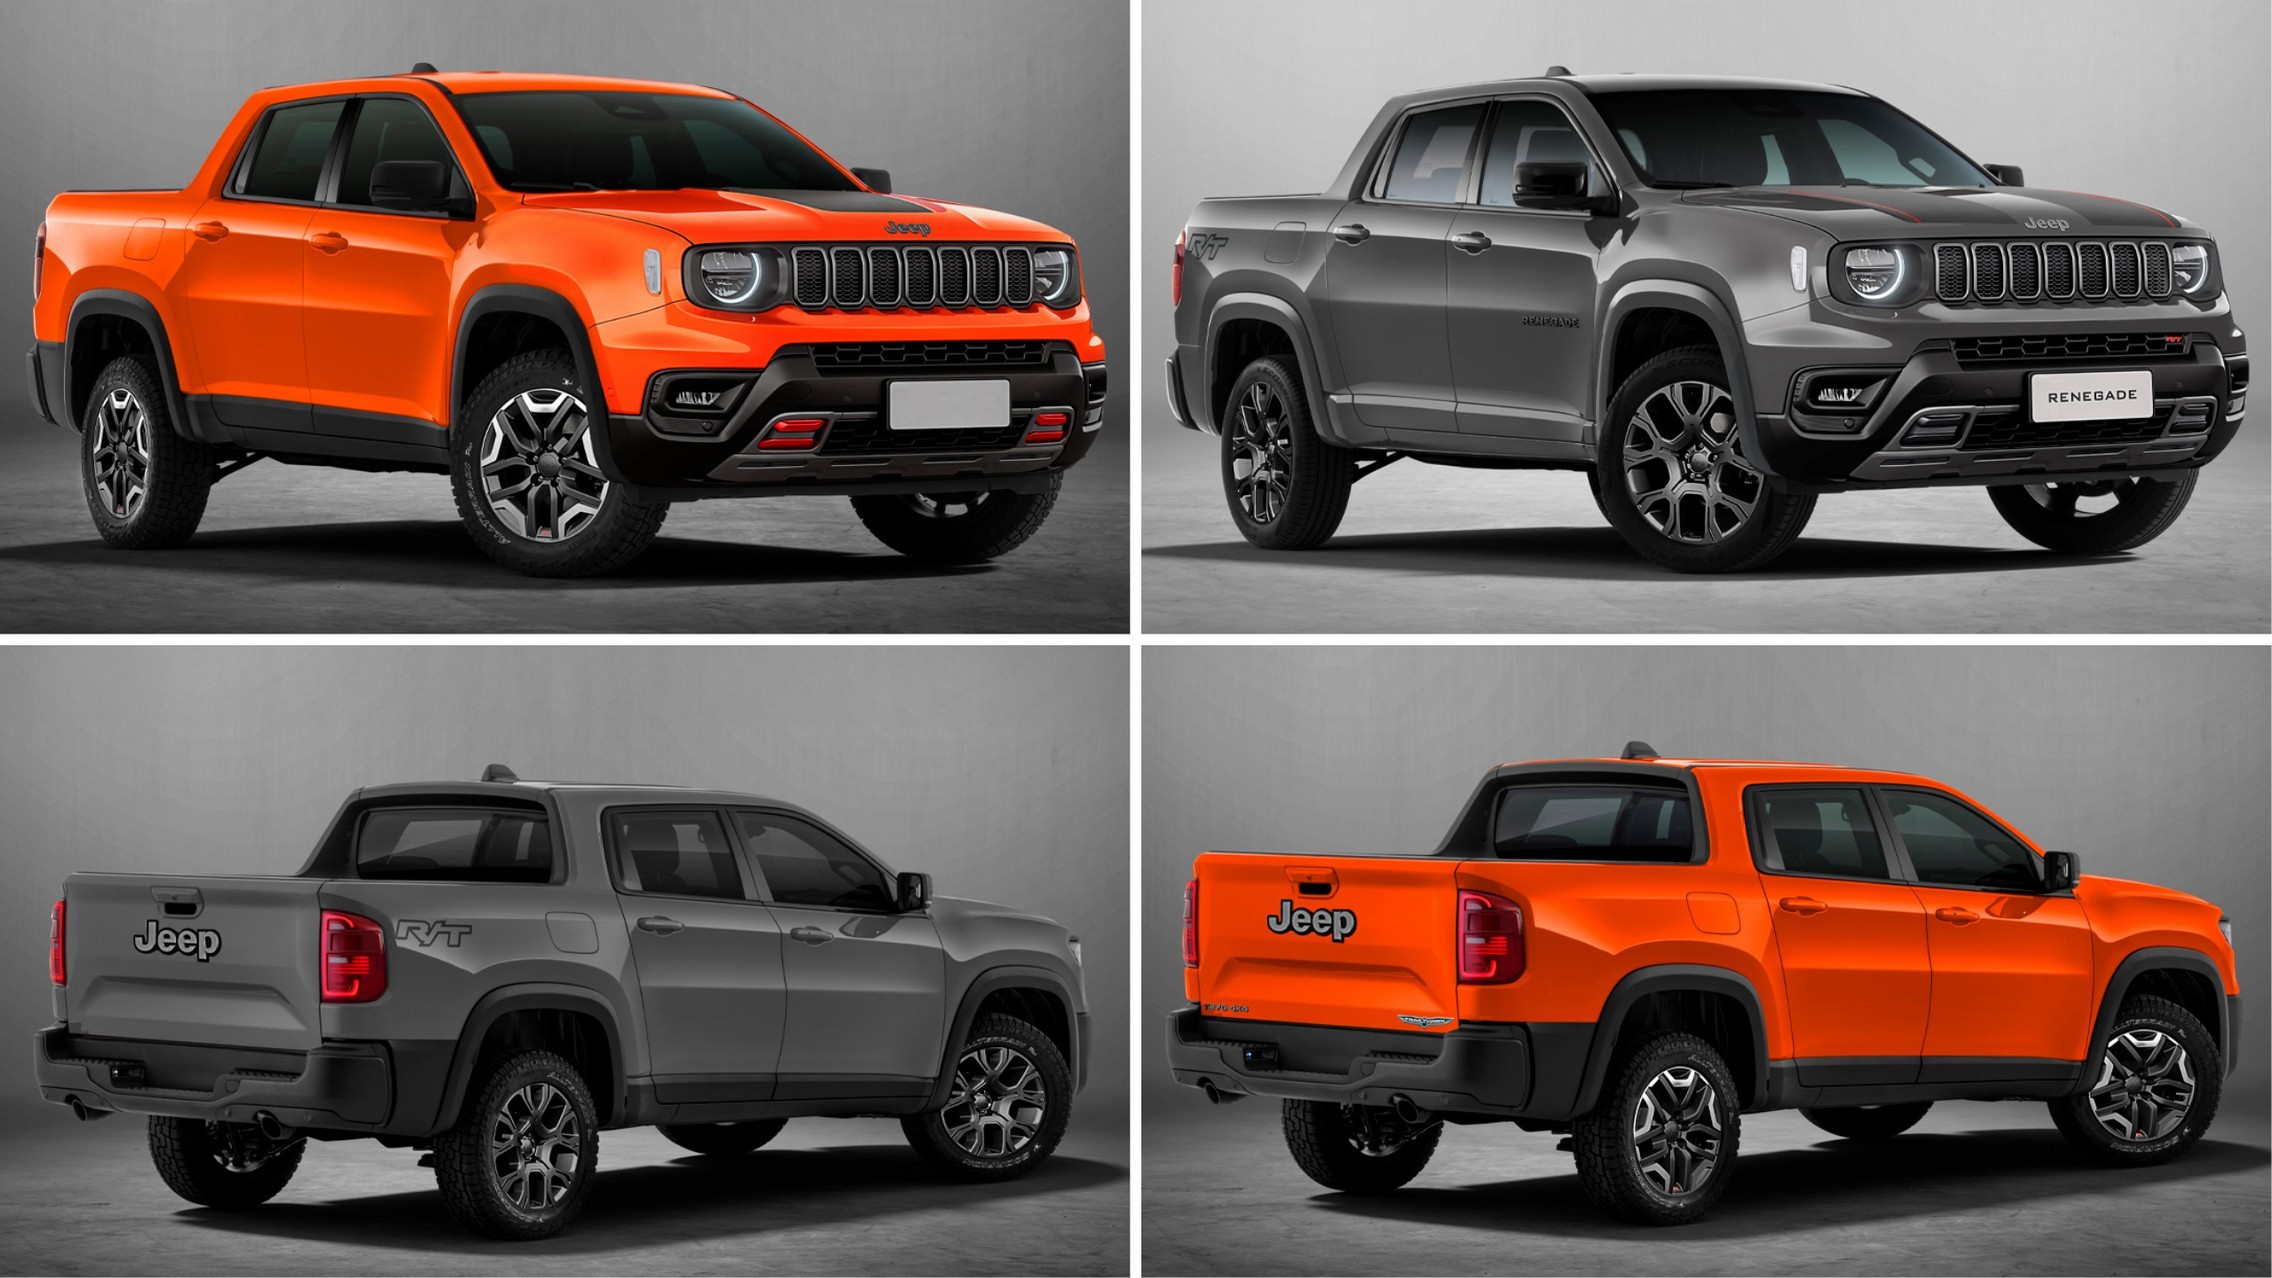 https://s1.cdn.autoevolution.com/images/news/gallery/jeep-renegade-truck-is-an-imagined-rebel-that-s-ready-to-rampage-across-the-compact-class_13.jpg